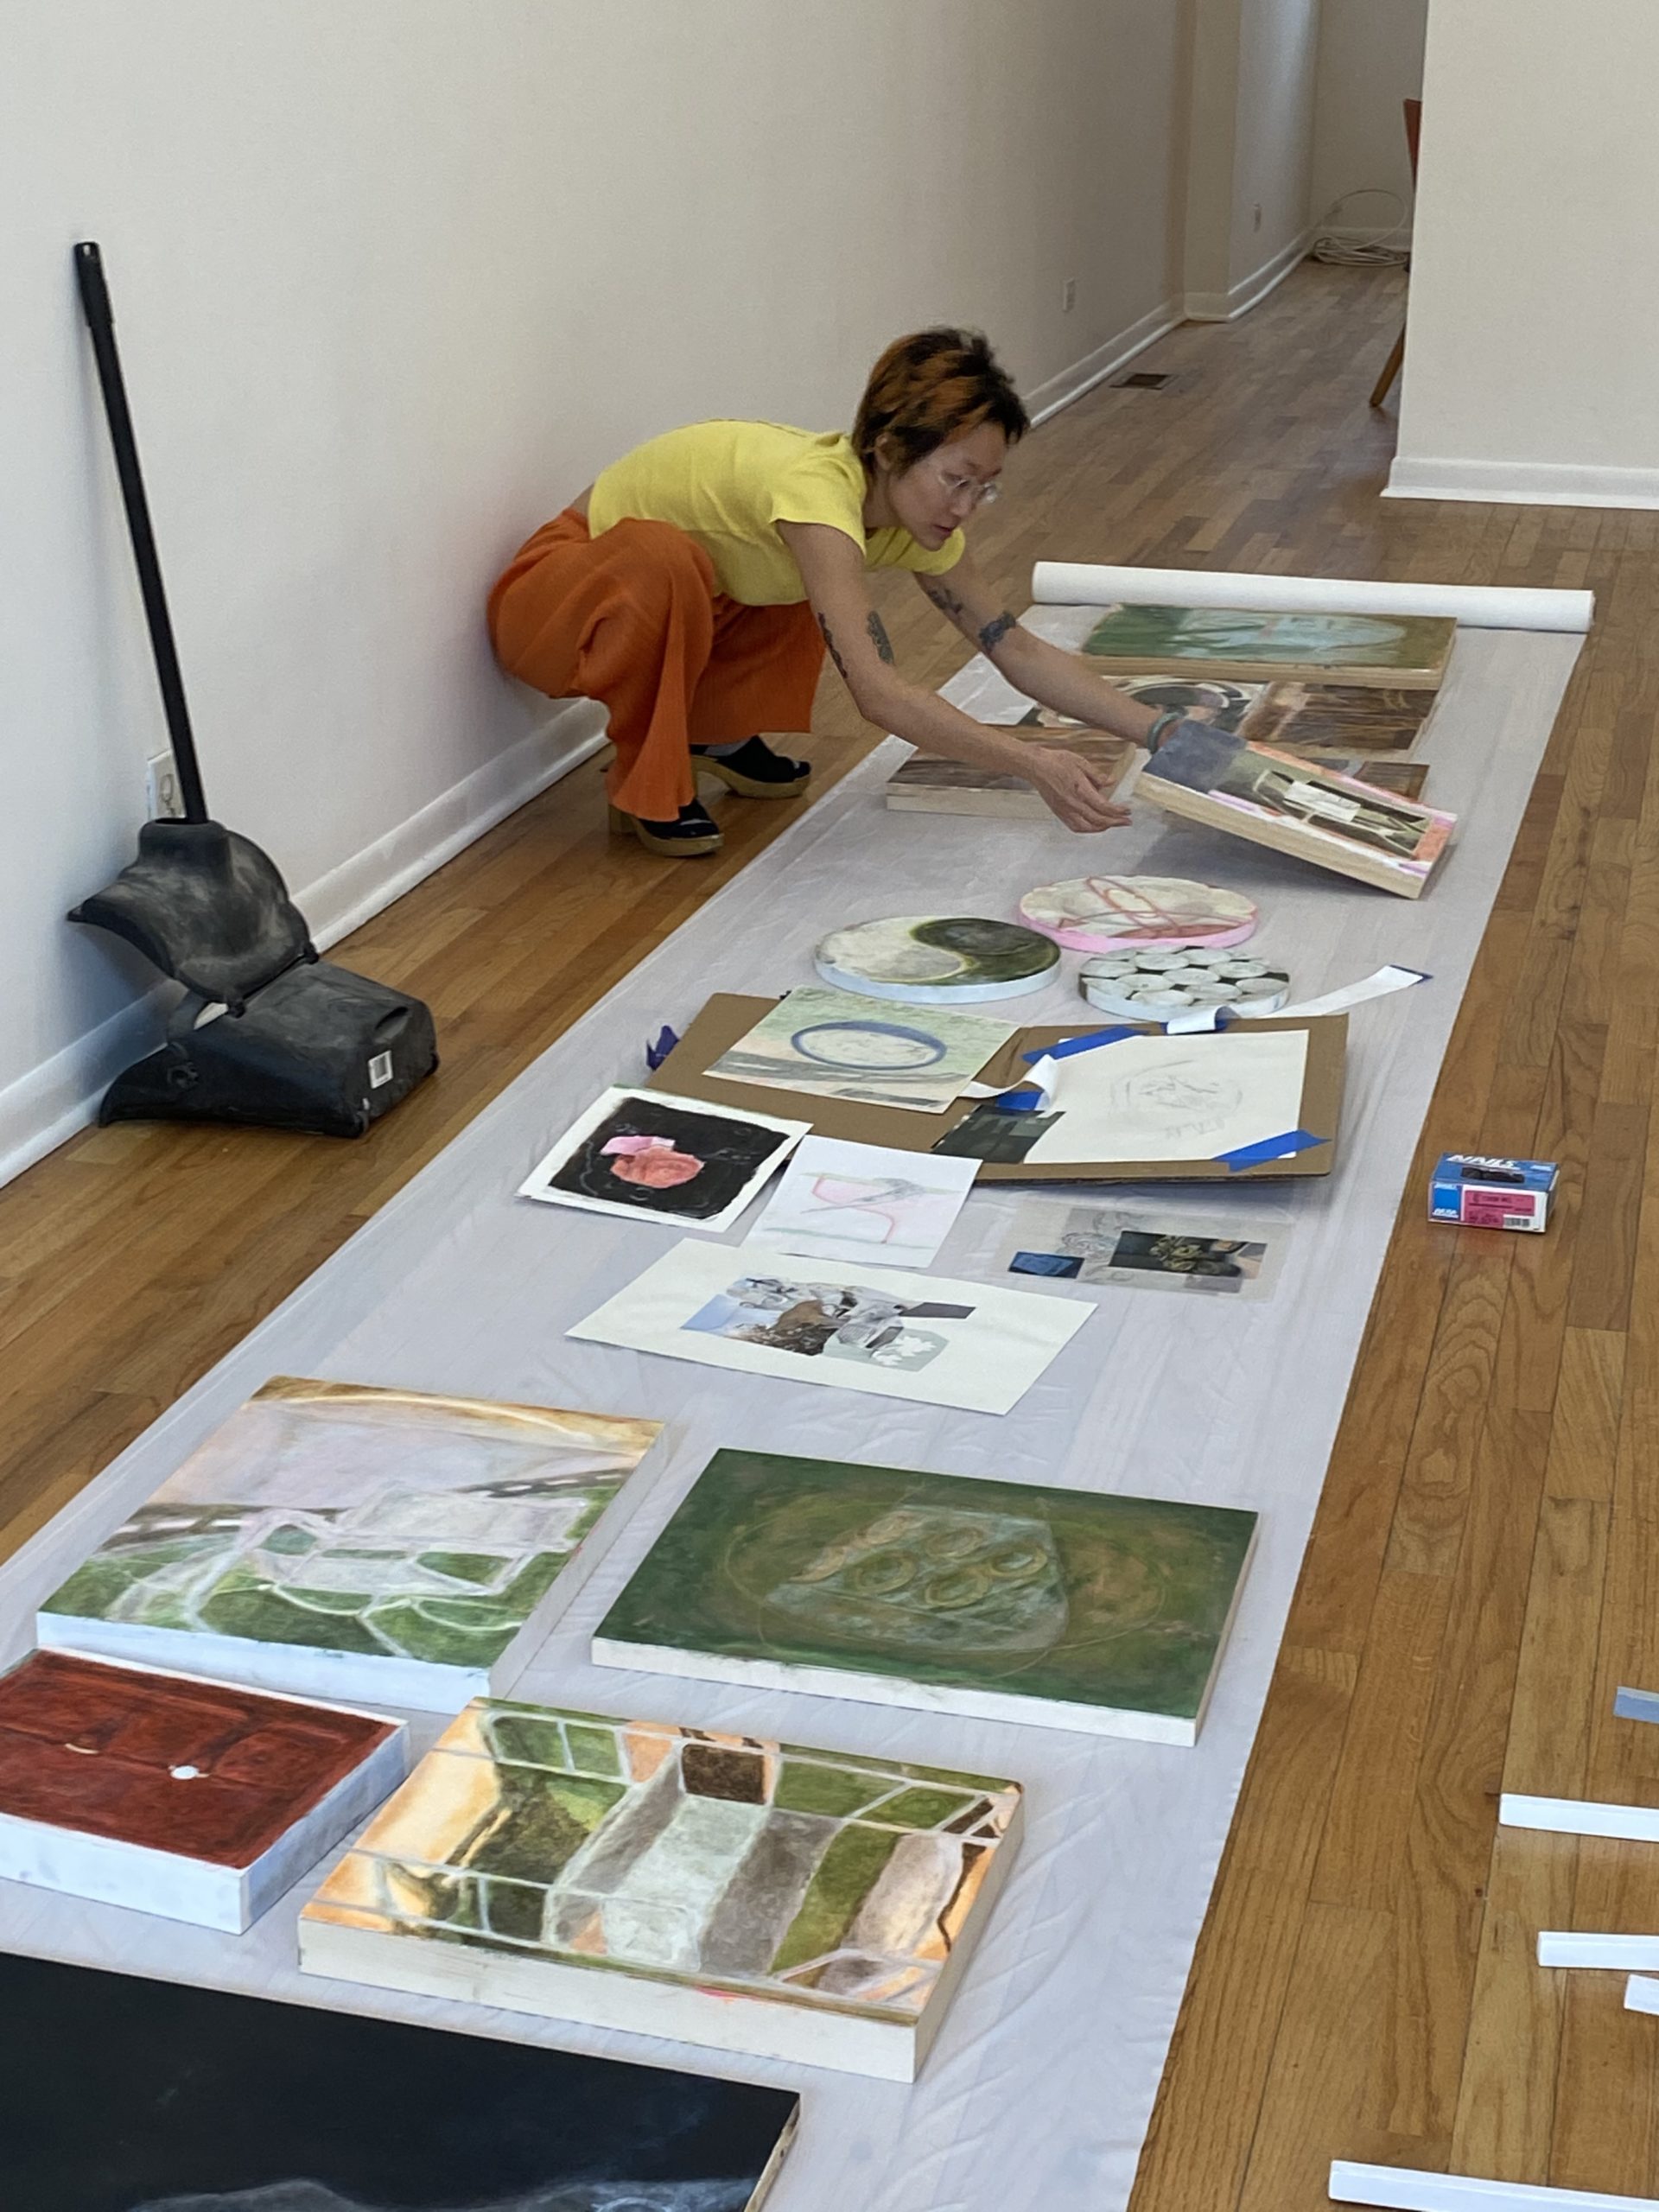 This is a photo of Angela Zhang preparing some of her art work.